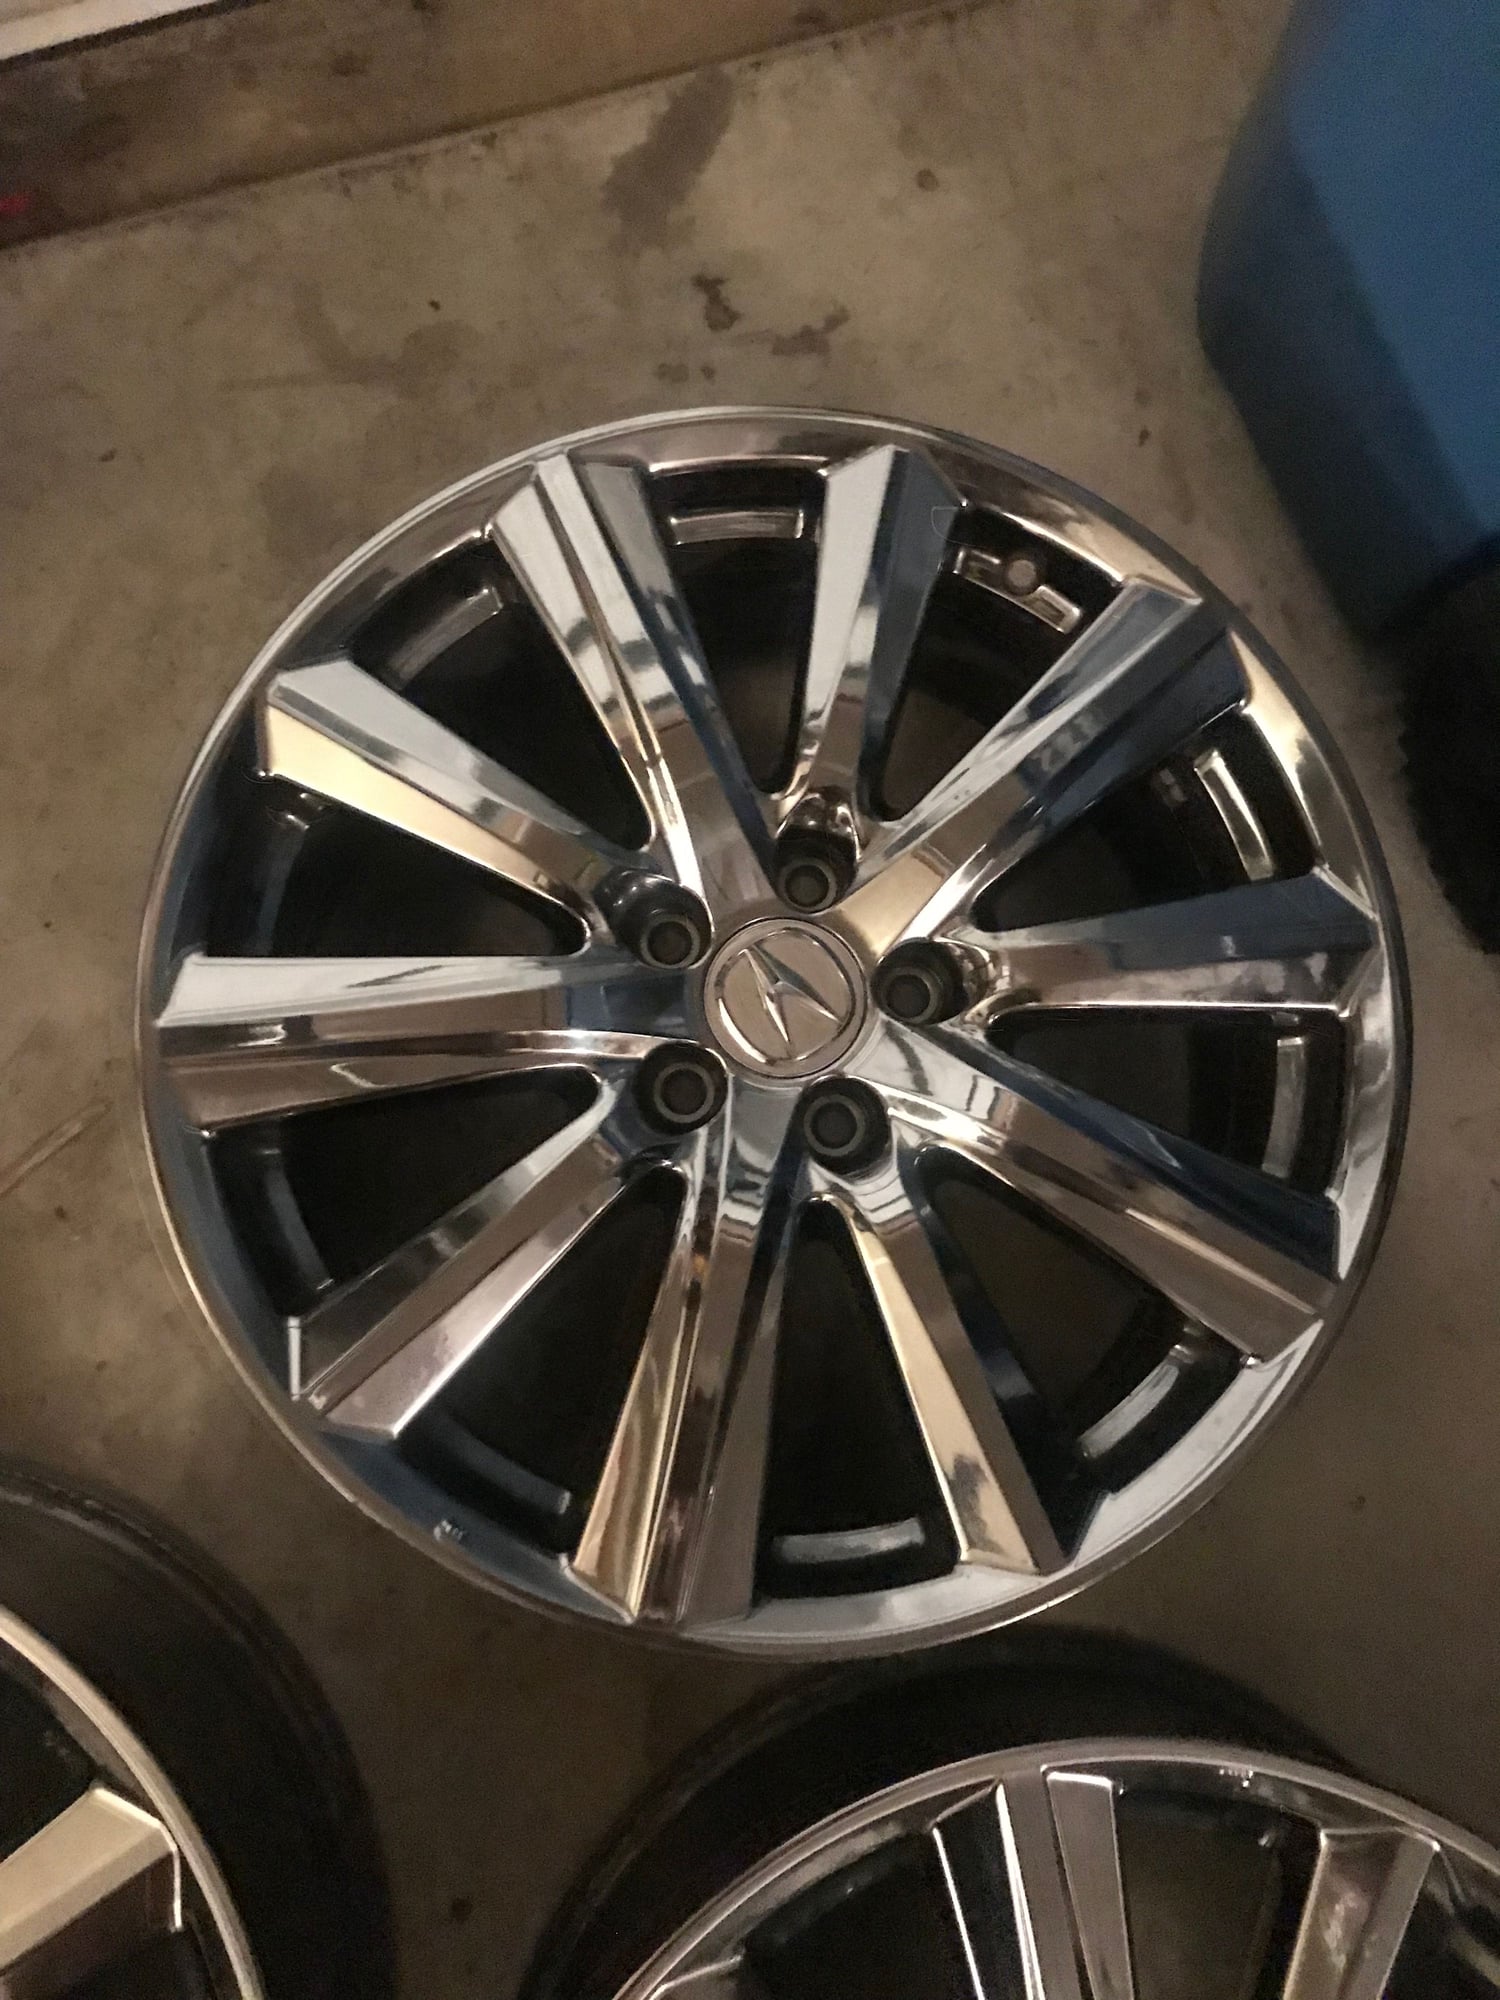 Wheels and Tires/Axles - FS: 2014+ Acura MDX 5x114 19x8 PVD chrome wheels - Used - 2015 to 2019 Acura TLX - 2014 to 2019 Acura MDX - 2004 to 2008 Acura TL - 2007 to 2019 Acura RDX - Chicago, IL 60417, United States